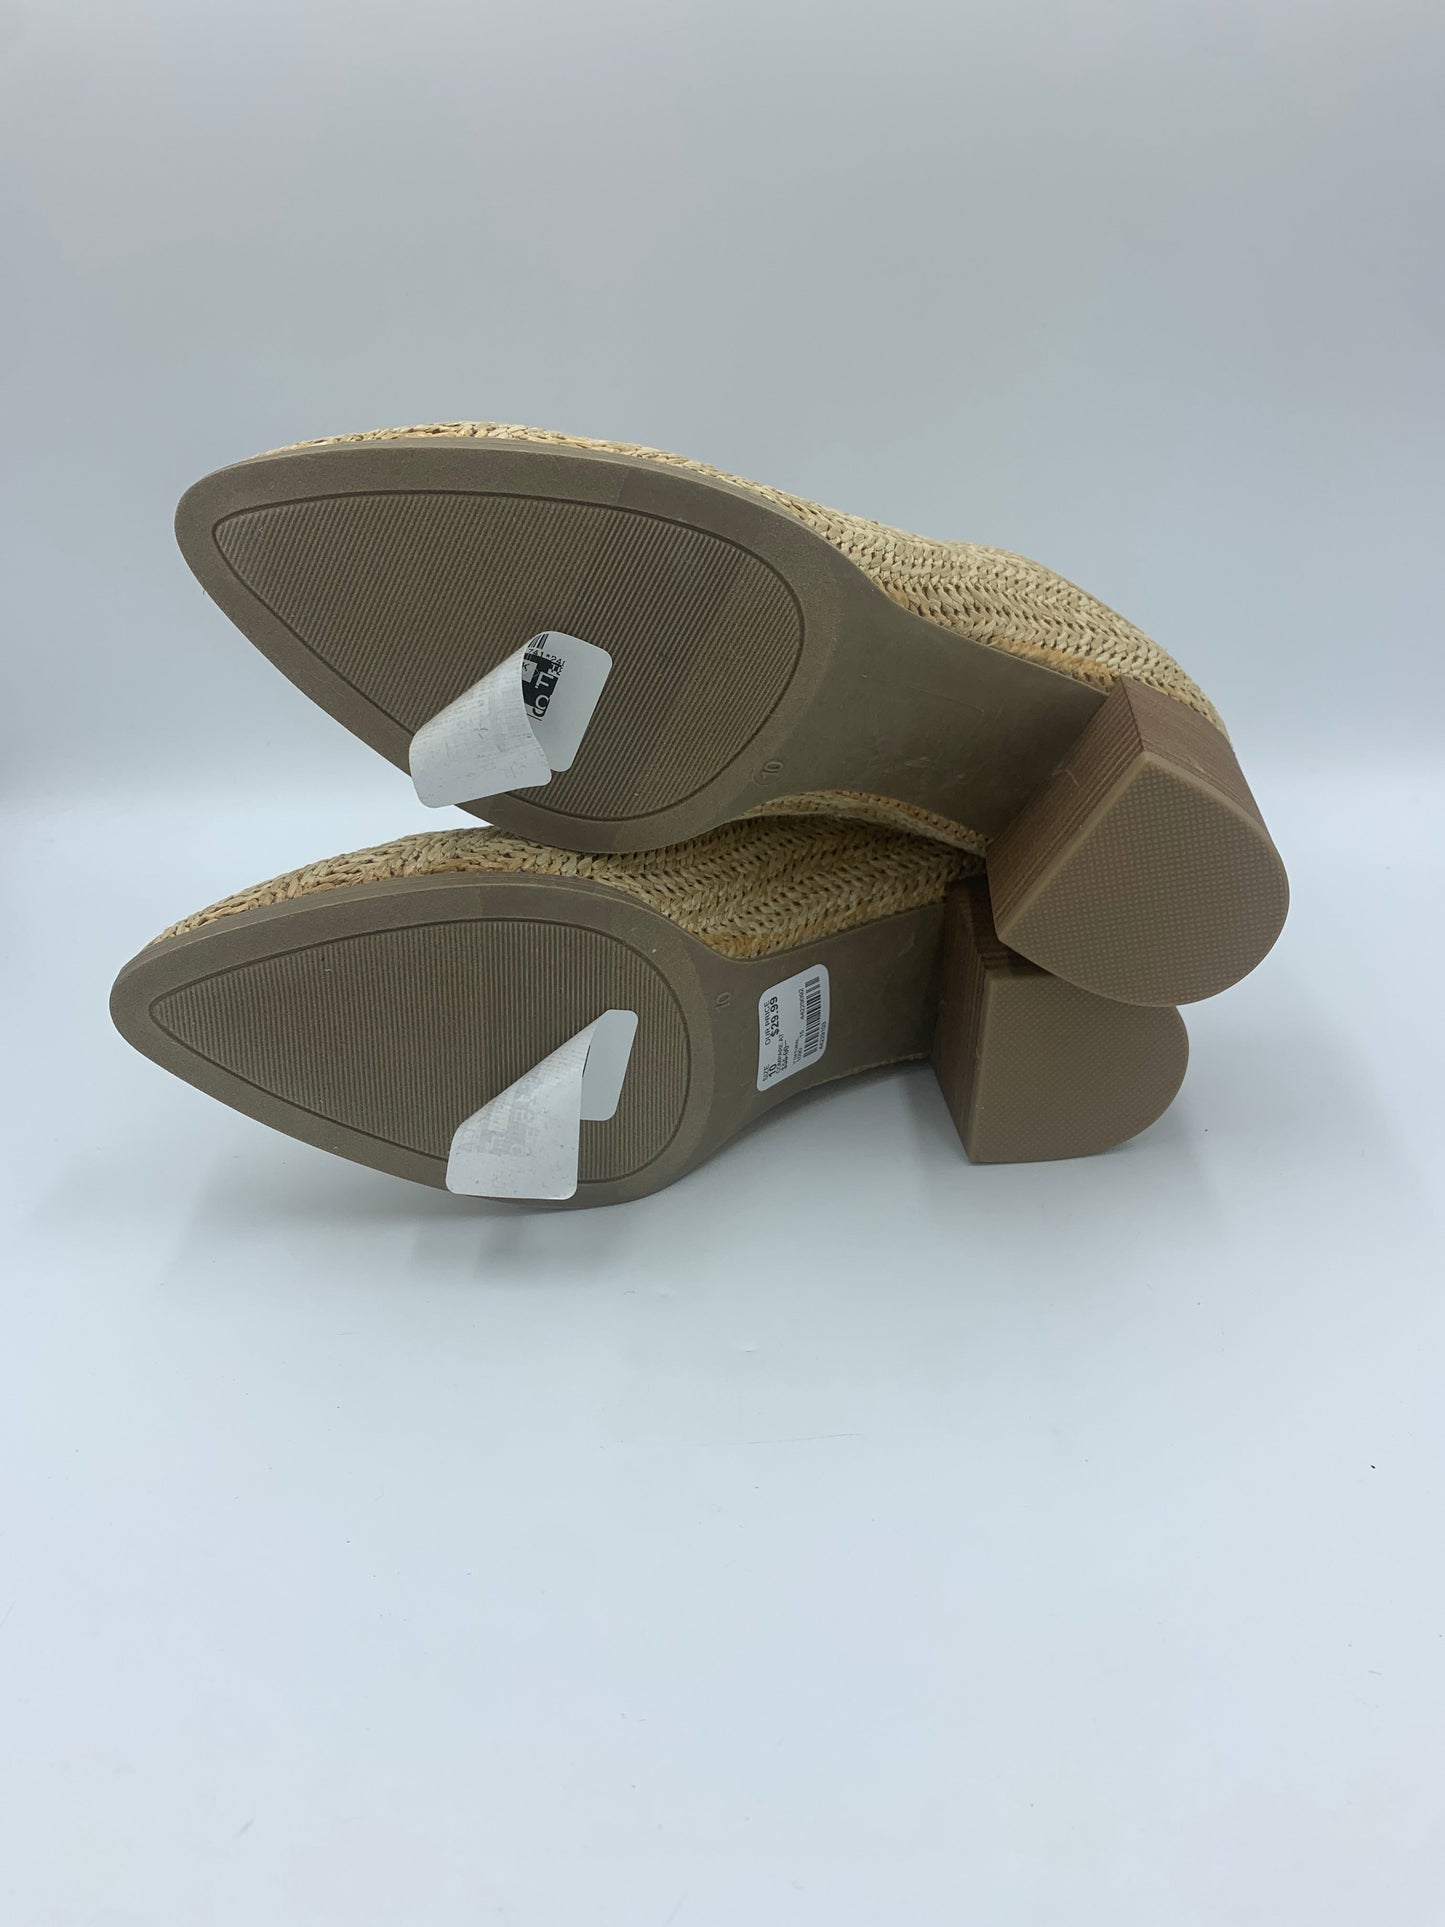 New! Tan Shoes Heels Block Cato, Size 10